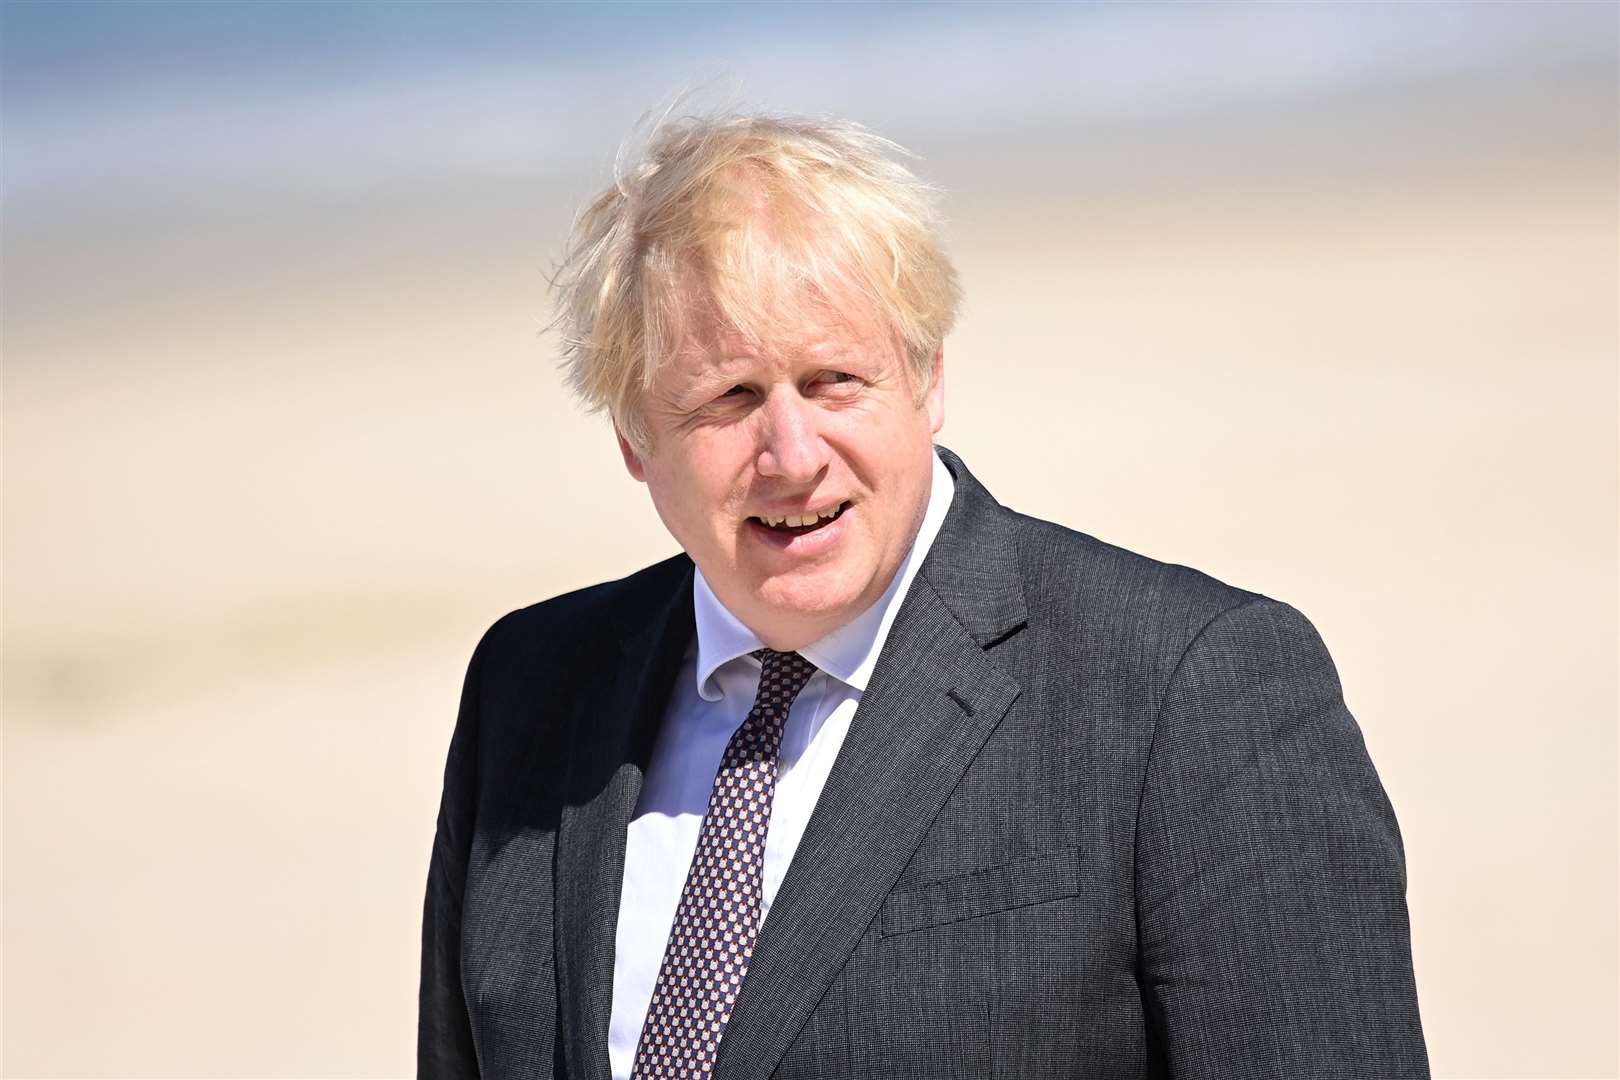 Prime Minister Boris Johnson has said he will do whatever it takes to keep goods flowing from Great Britain to Northern Ireland (Leon Neal/PA)